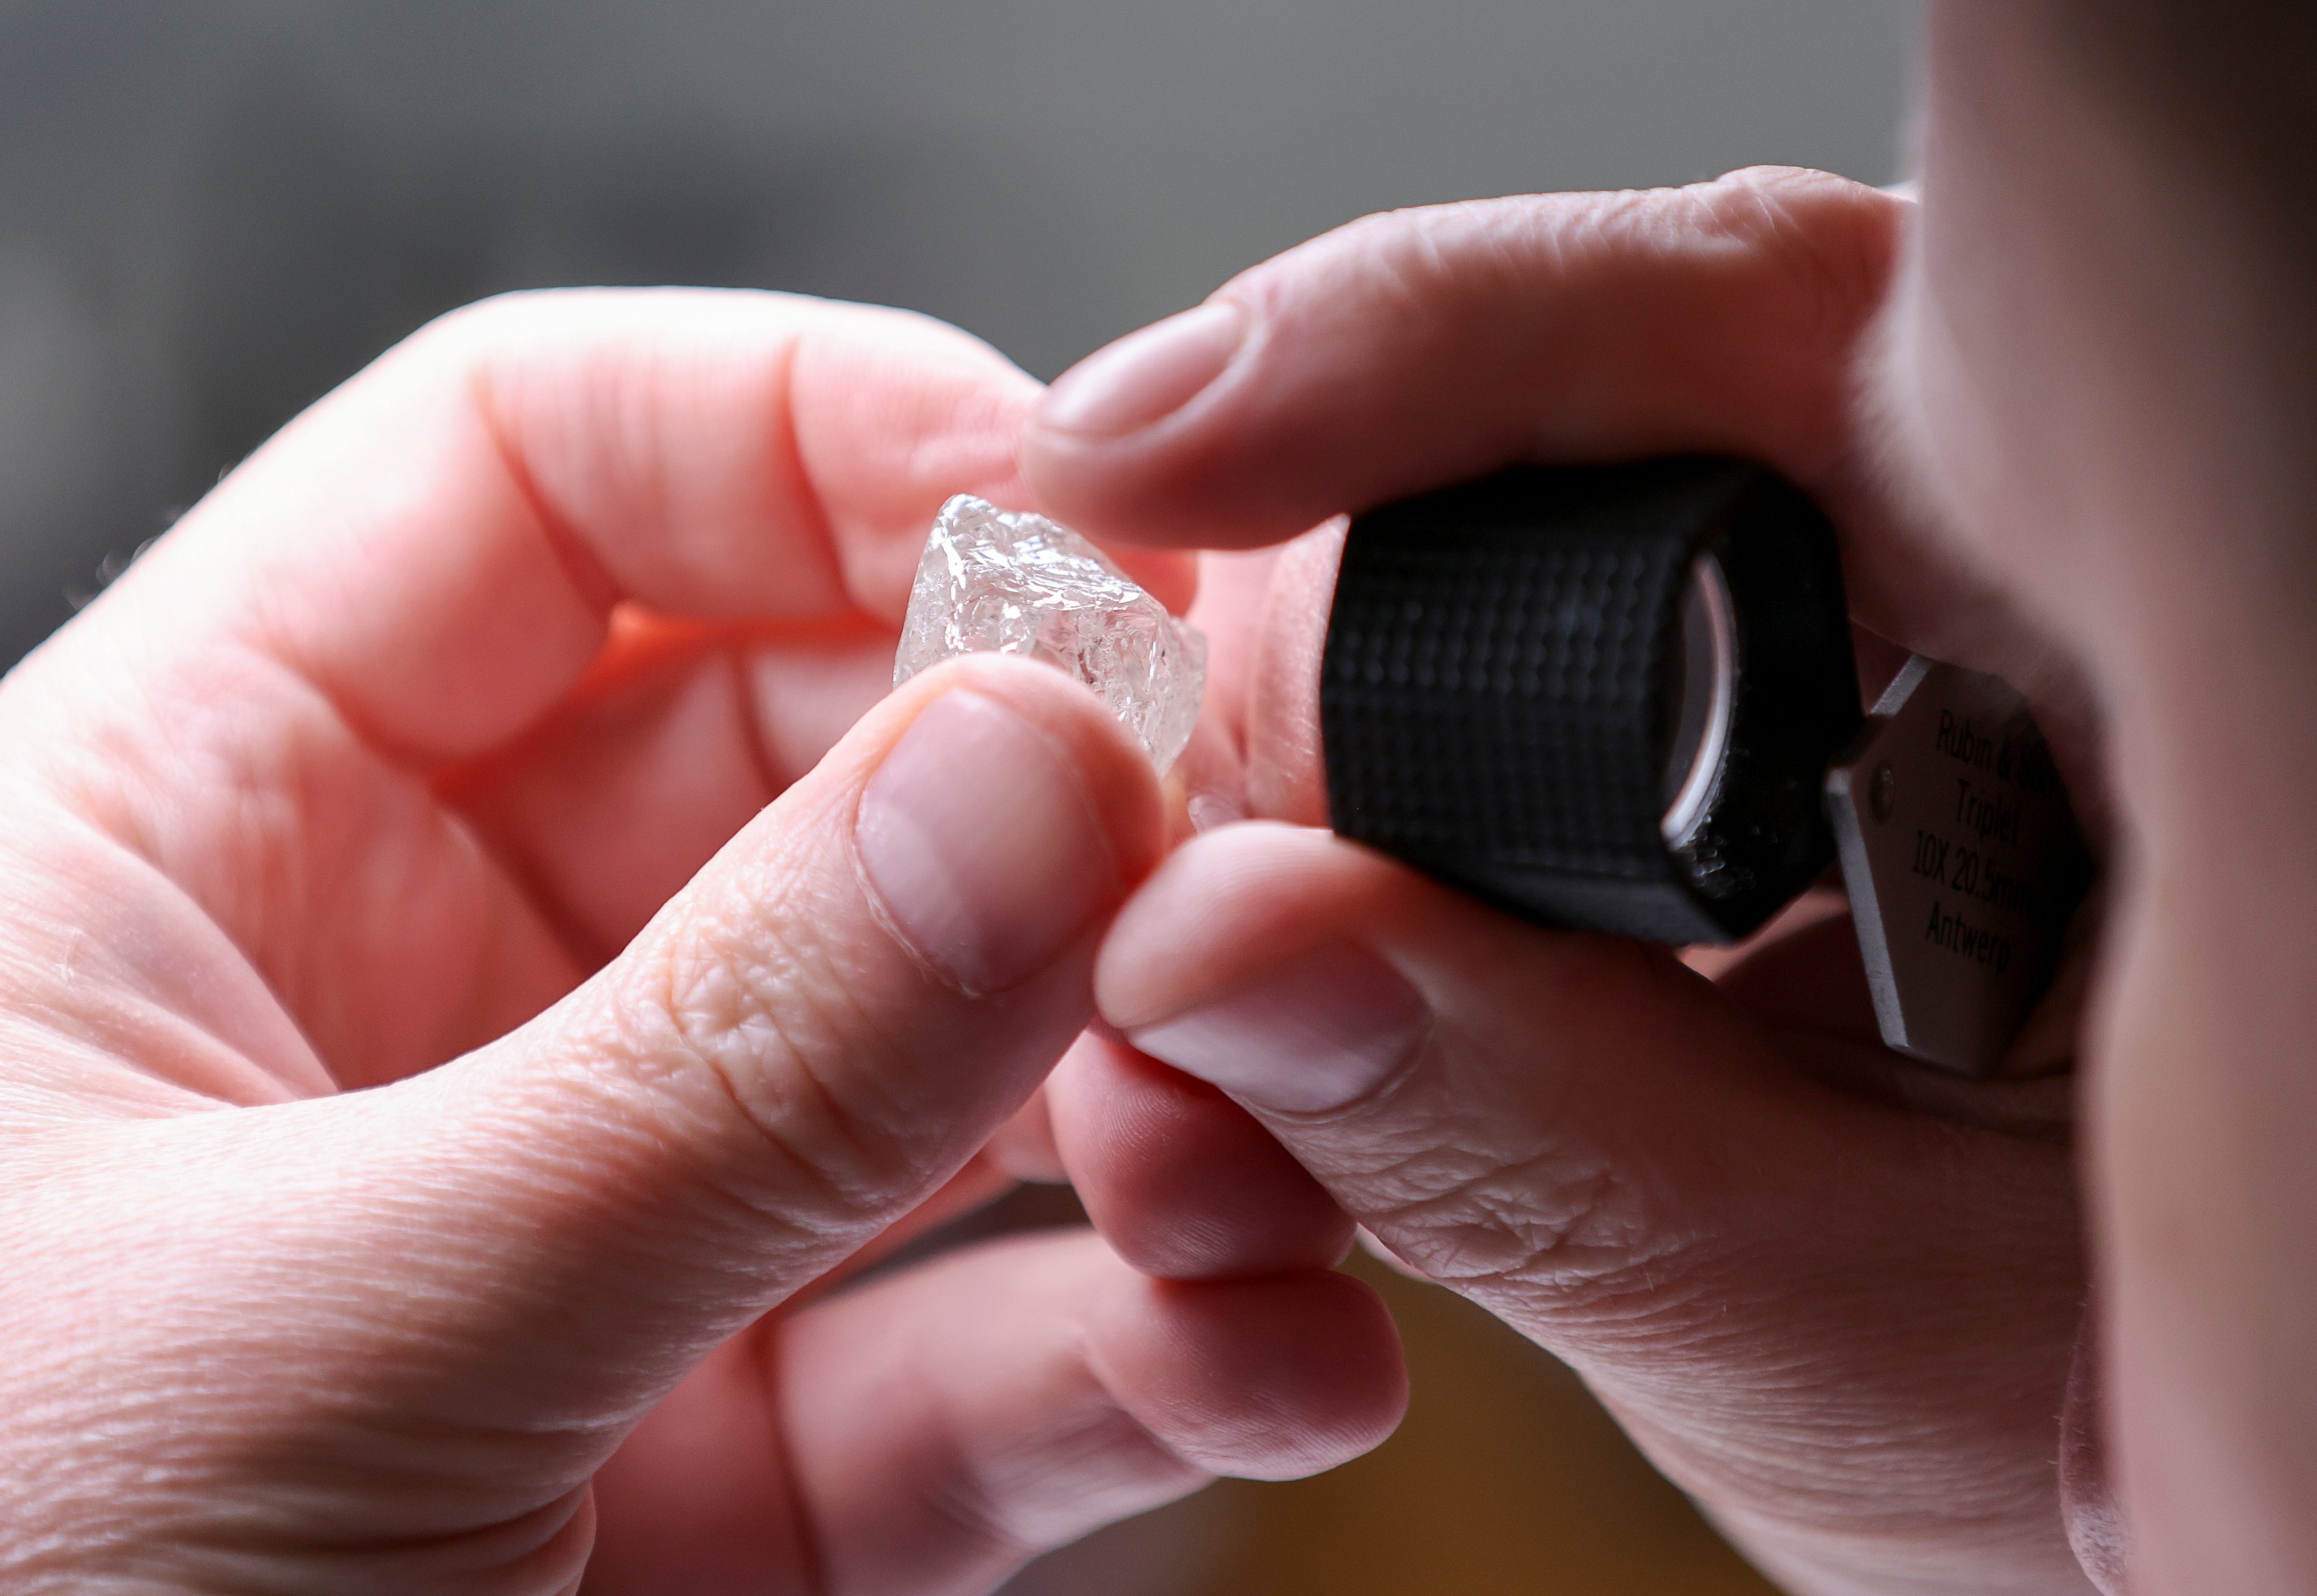 Lab-grown diamonds now make up a fifth of the market, but their popularity has begun to fall. Photo: Reuters